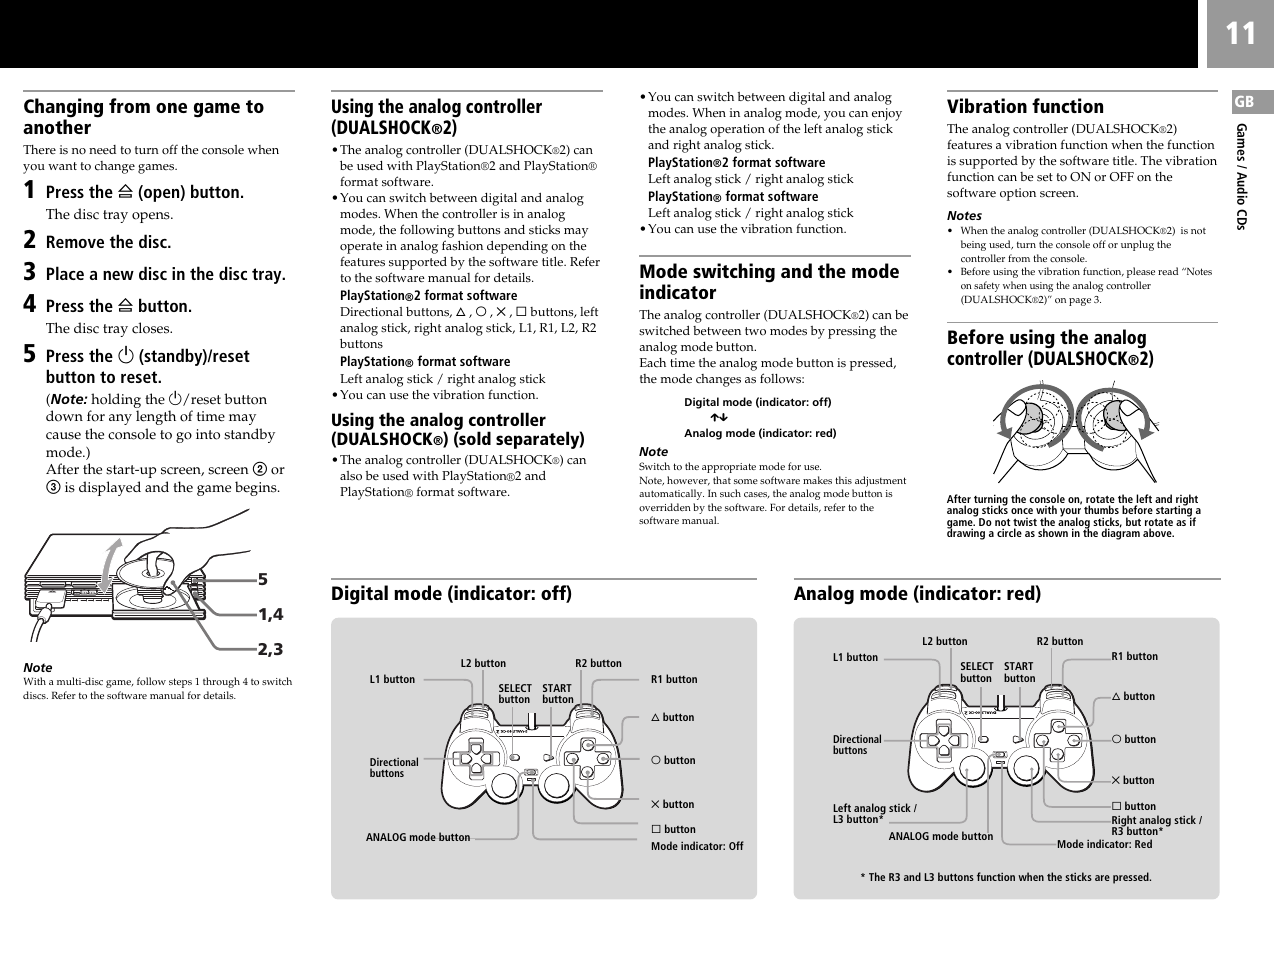 Changing from one game to another, Using the analog controller (dualshock, Mode switching and the mode indicator | Vibration function, Before using the analog controller (dualshock | Sony SCPH-50006 User Manual | Page 11 / 56